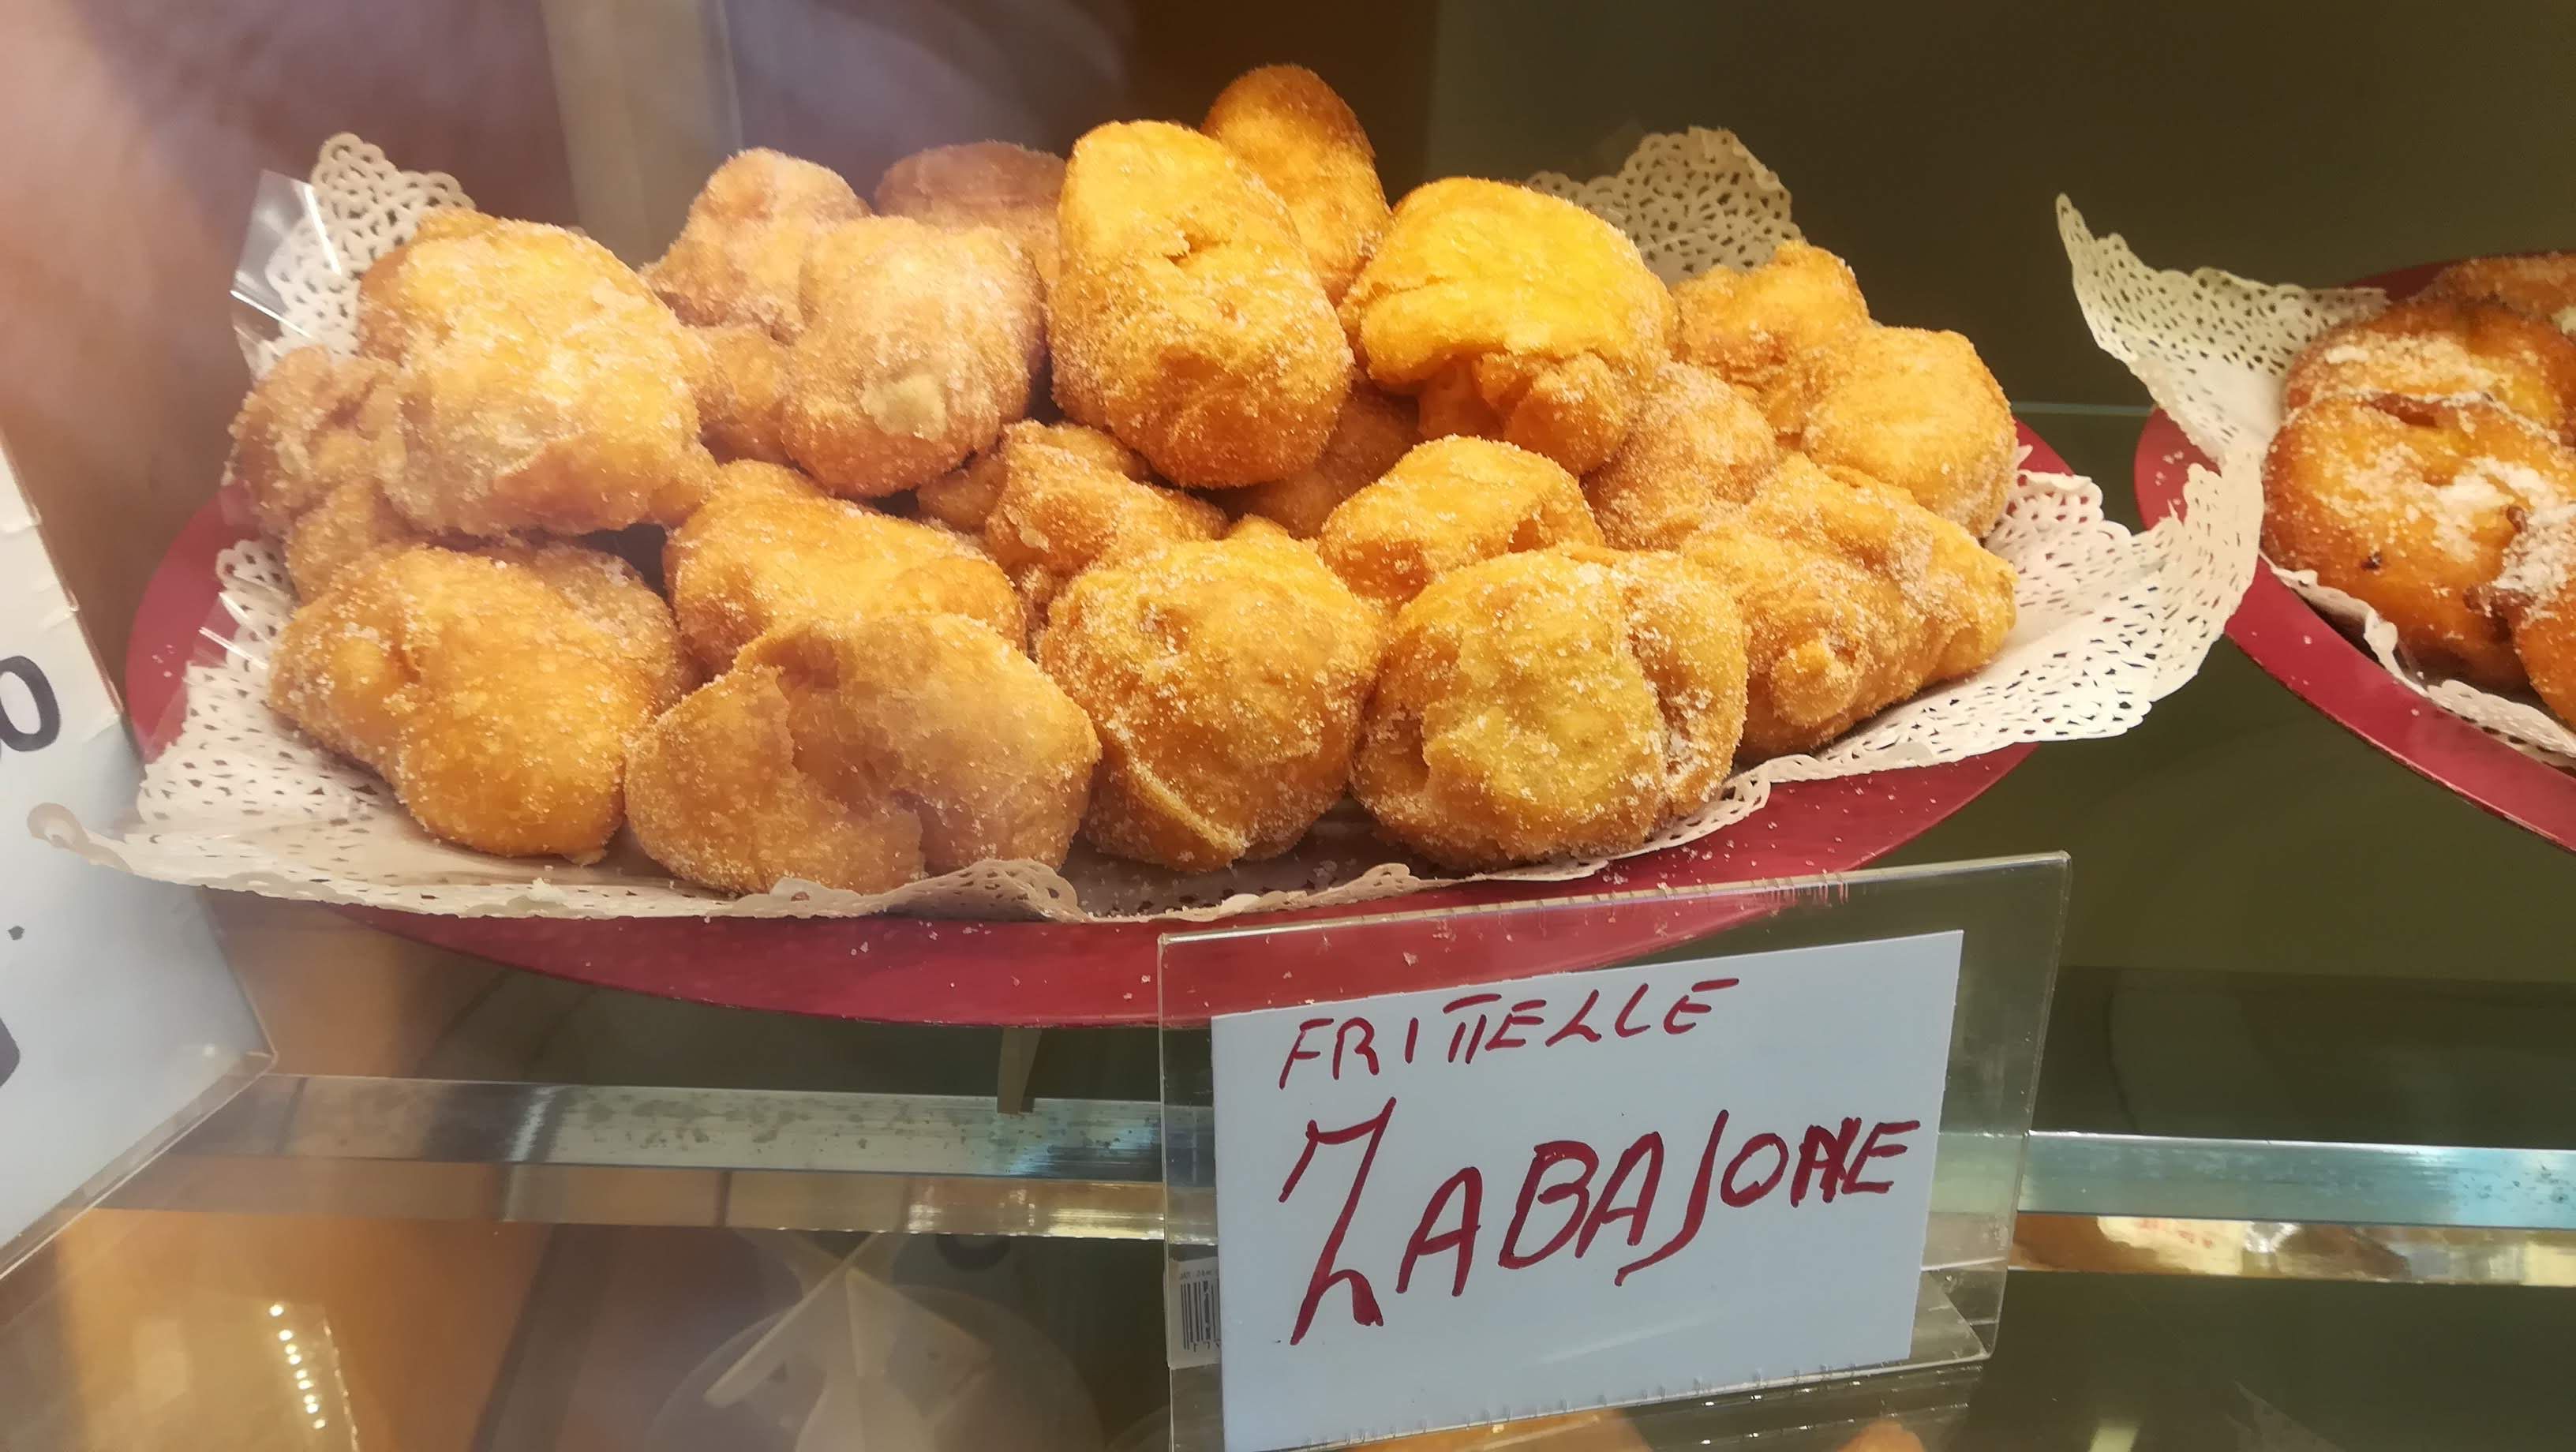 Caption - Frittelle with zabaione - Local Guide @ermest